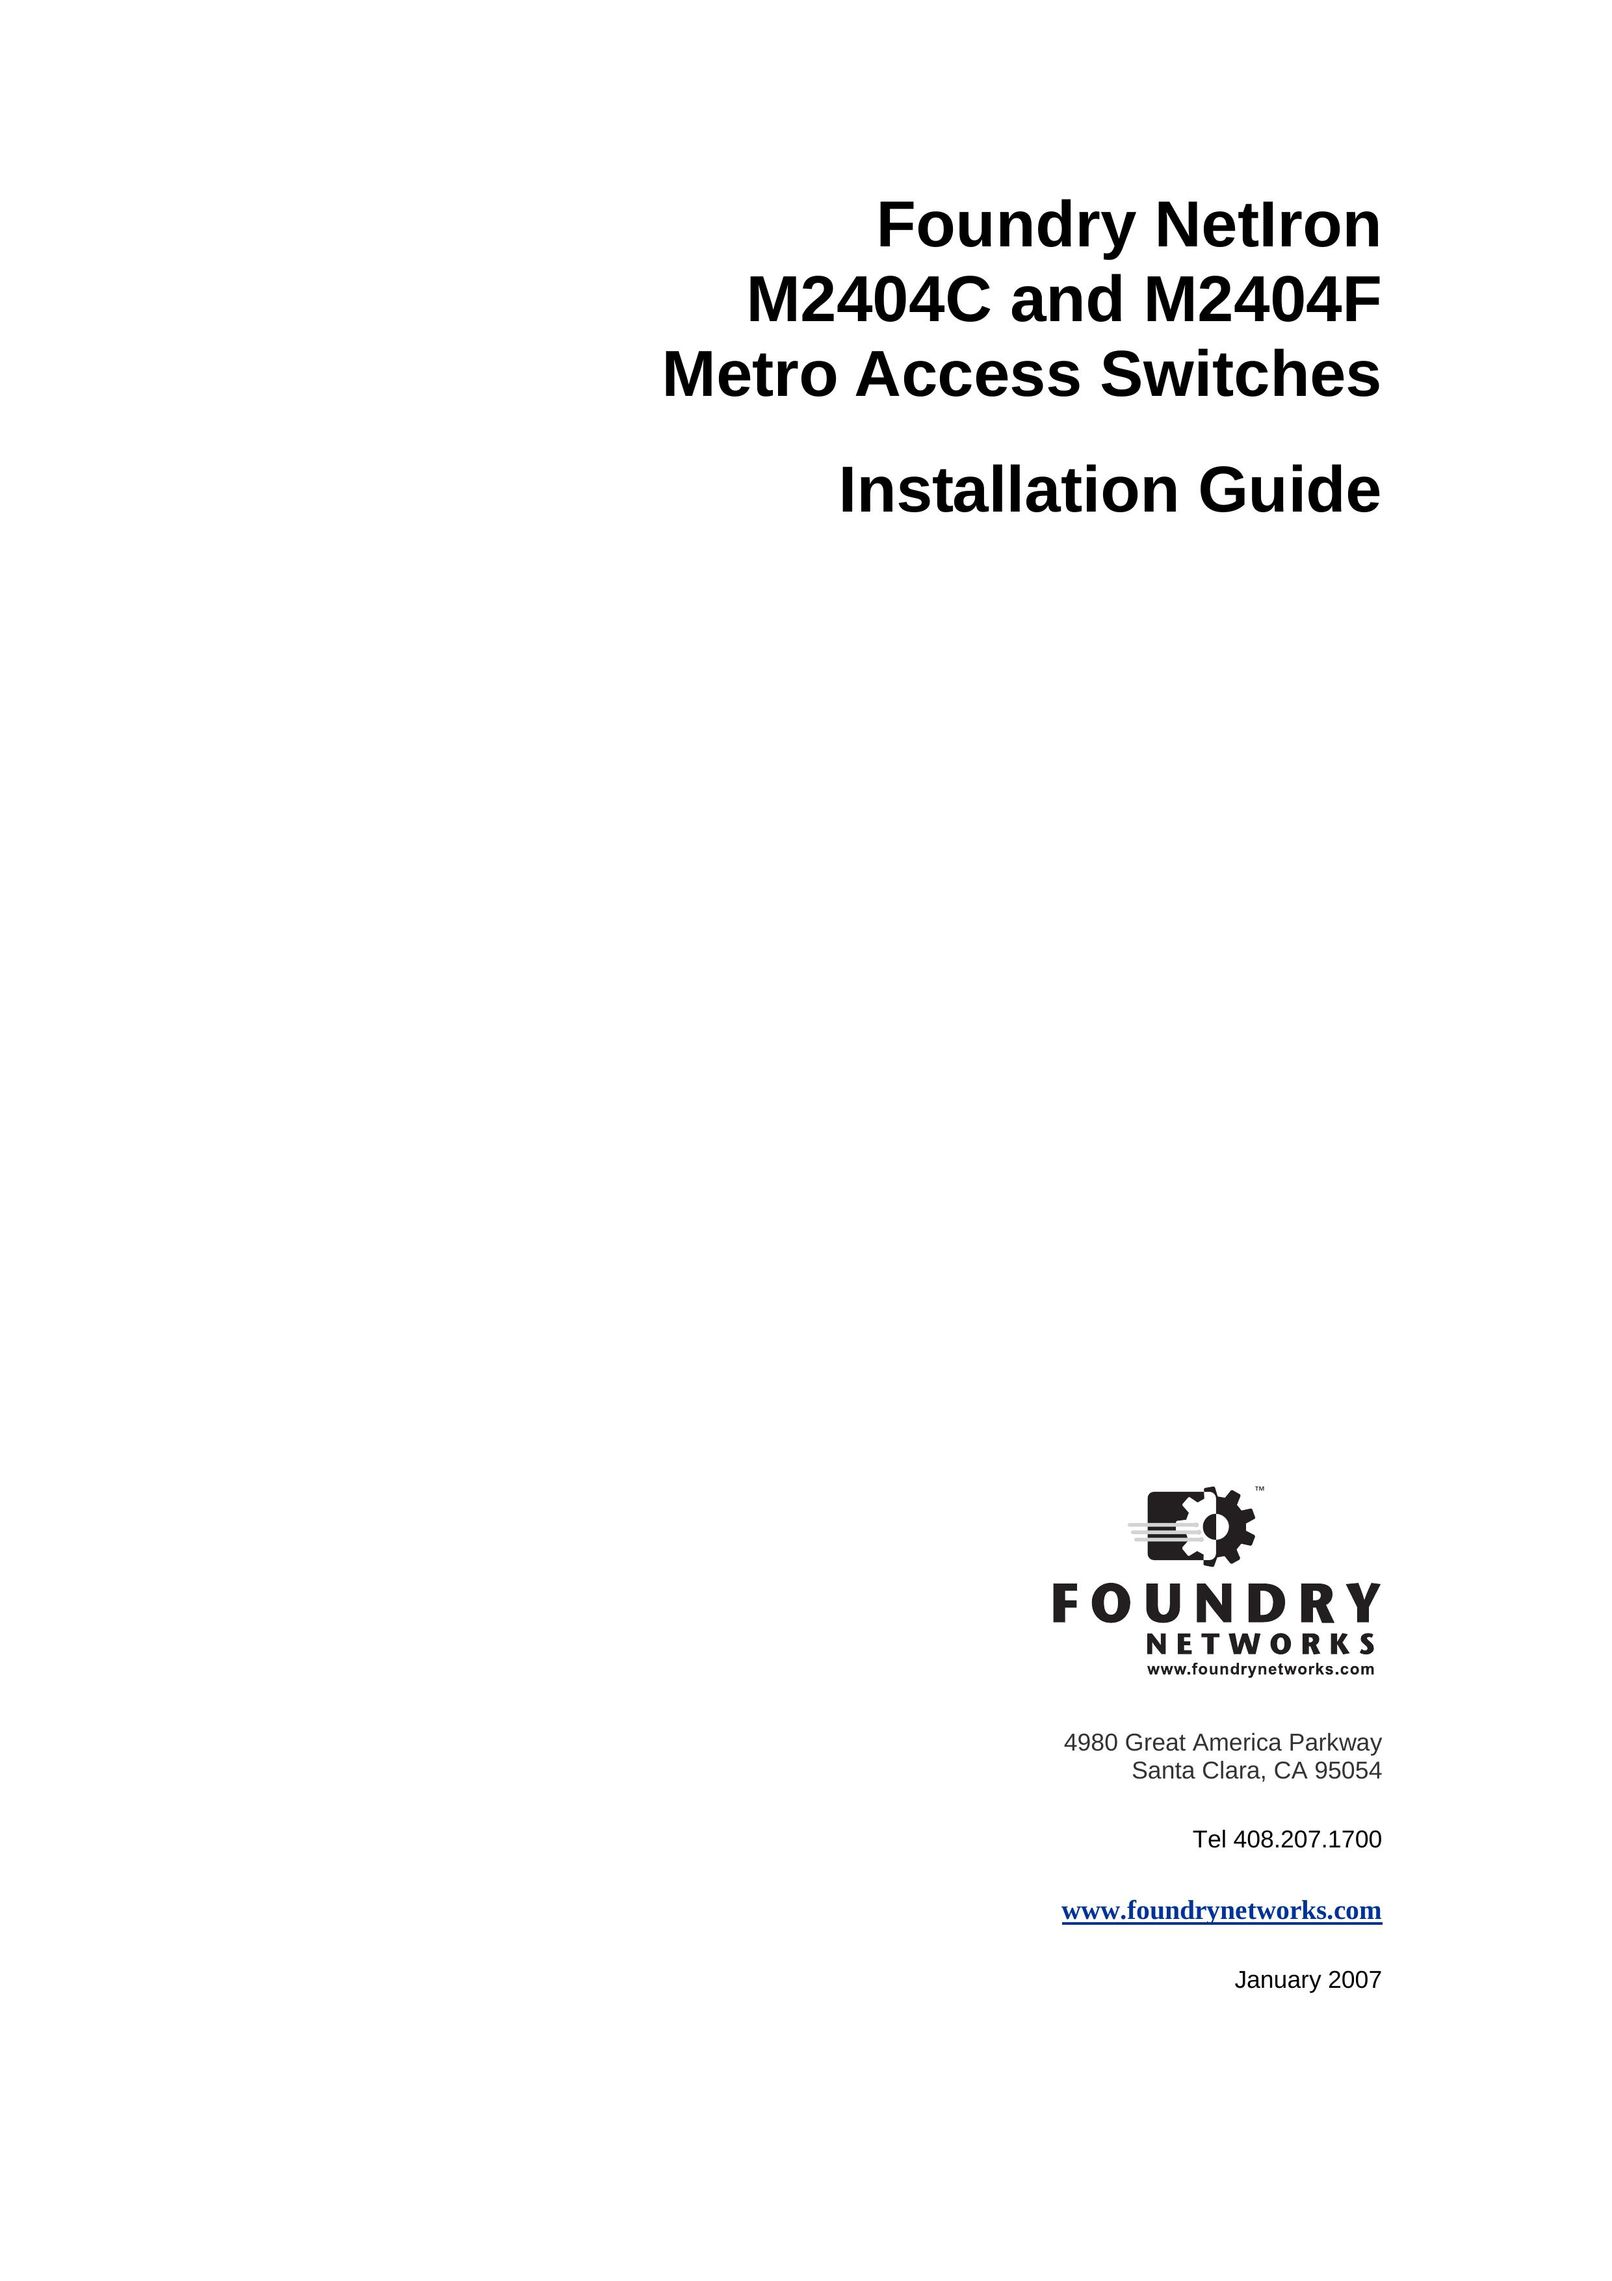 Foundry Networks M2404F Switch User Manual